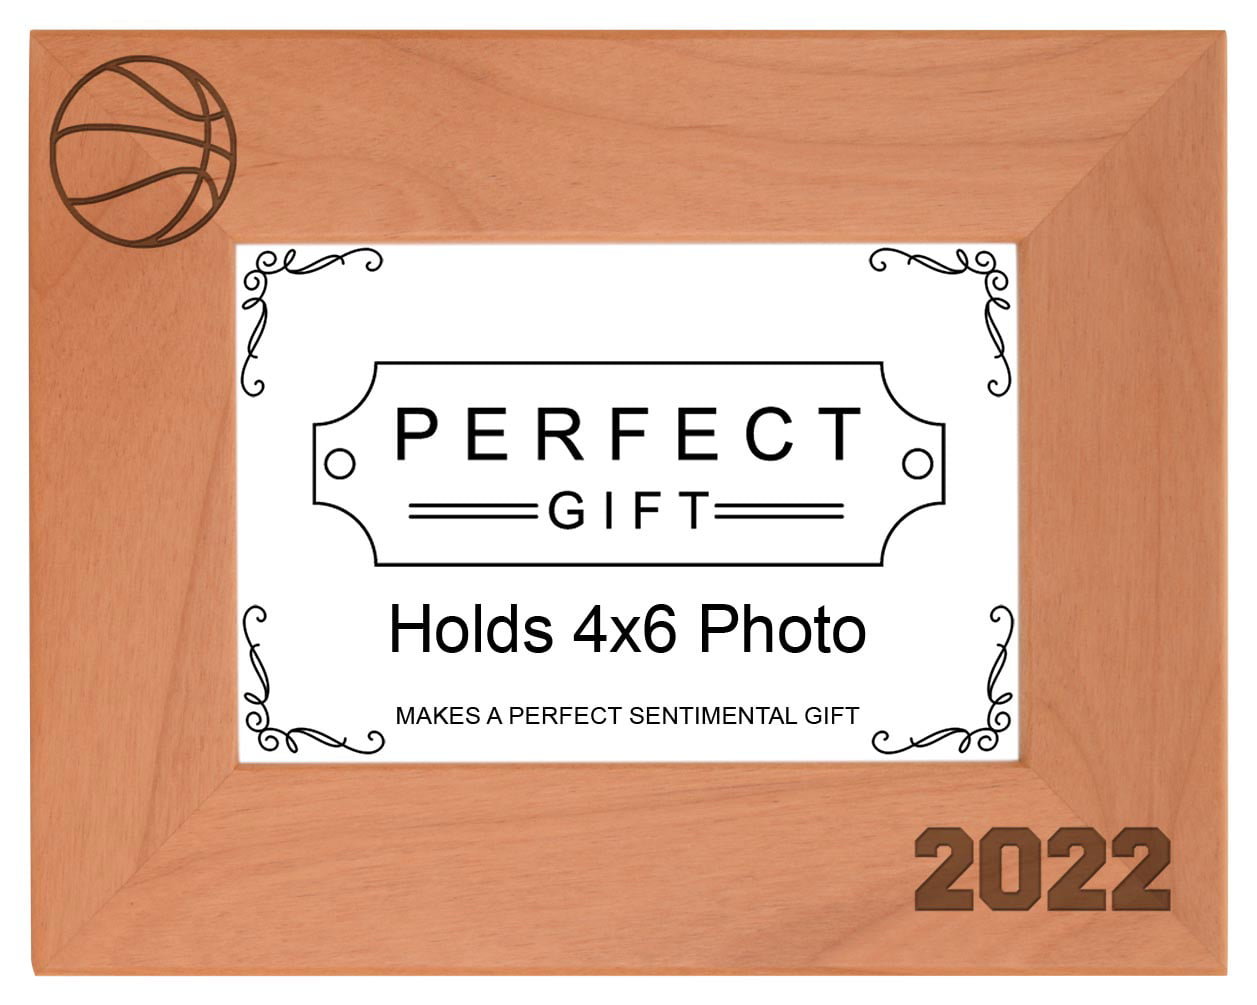 Personalized Picture Frame Mom of Boys with Your Custom Message Engraved Wood Picture Frame Horizontal 8x10